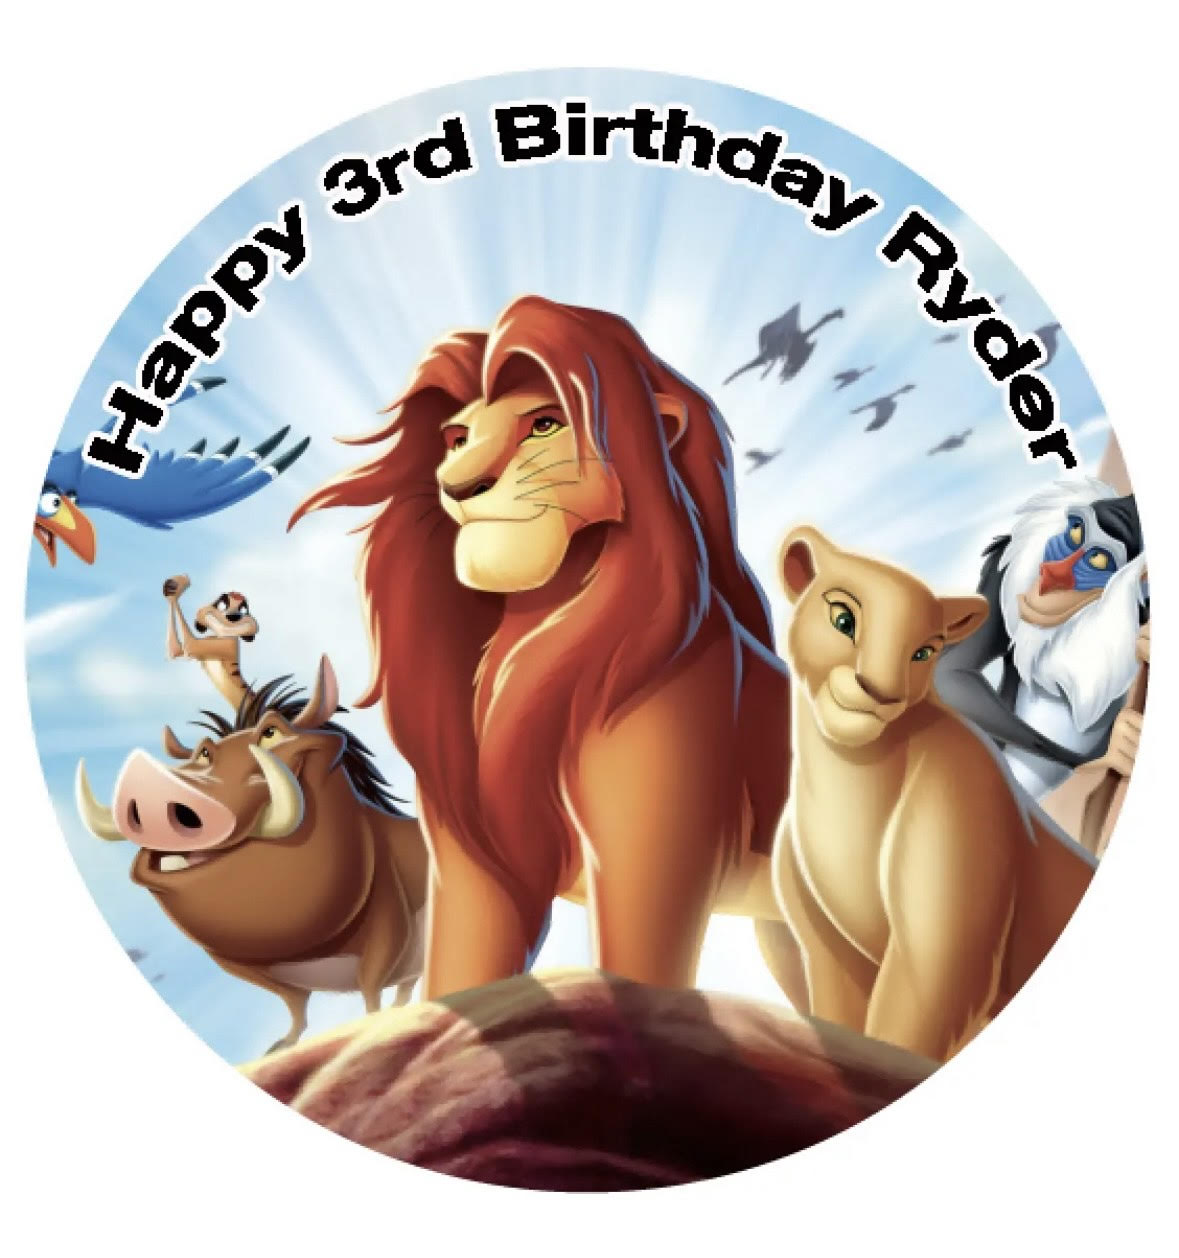 The Lion King #2 Round Cake Edible Icing Image Topper 19cm